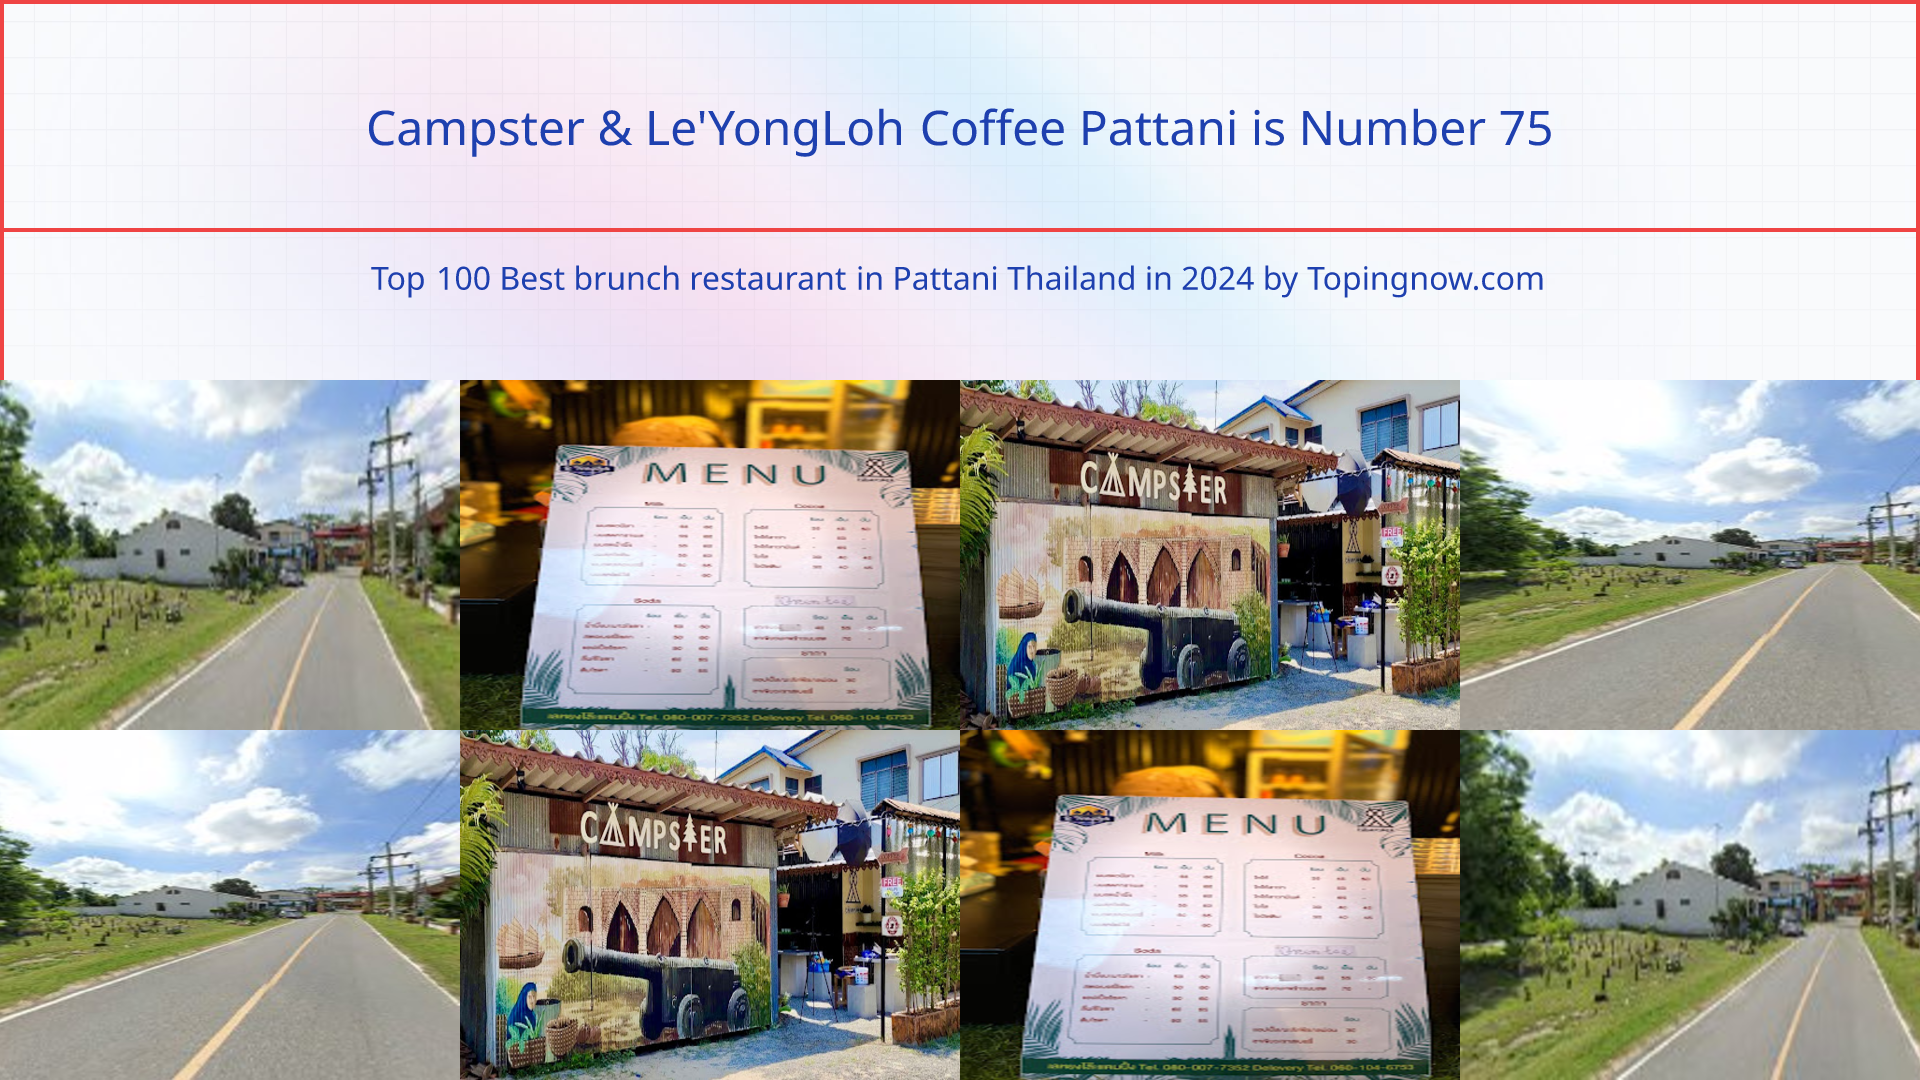 Campster & Le'YongLoh Coffee Pattani: Top 100 Best brunch restaurant in Pattani Thailand in 2024